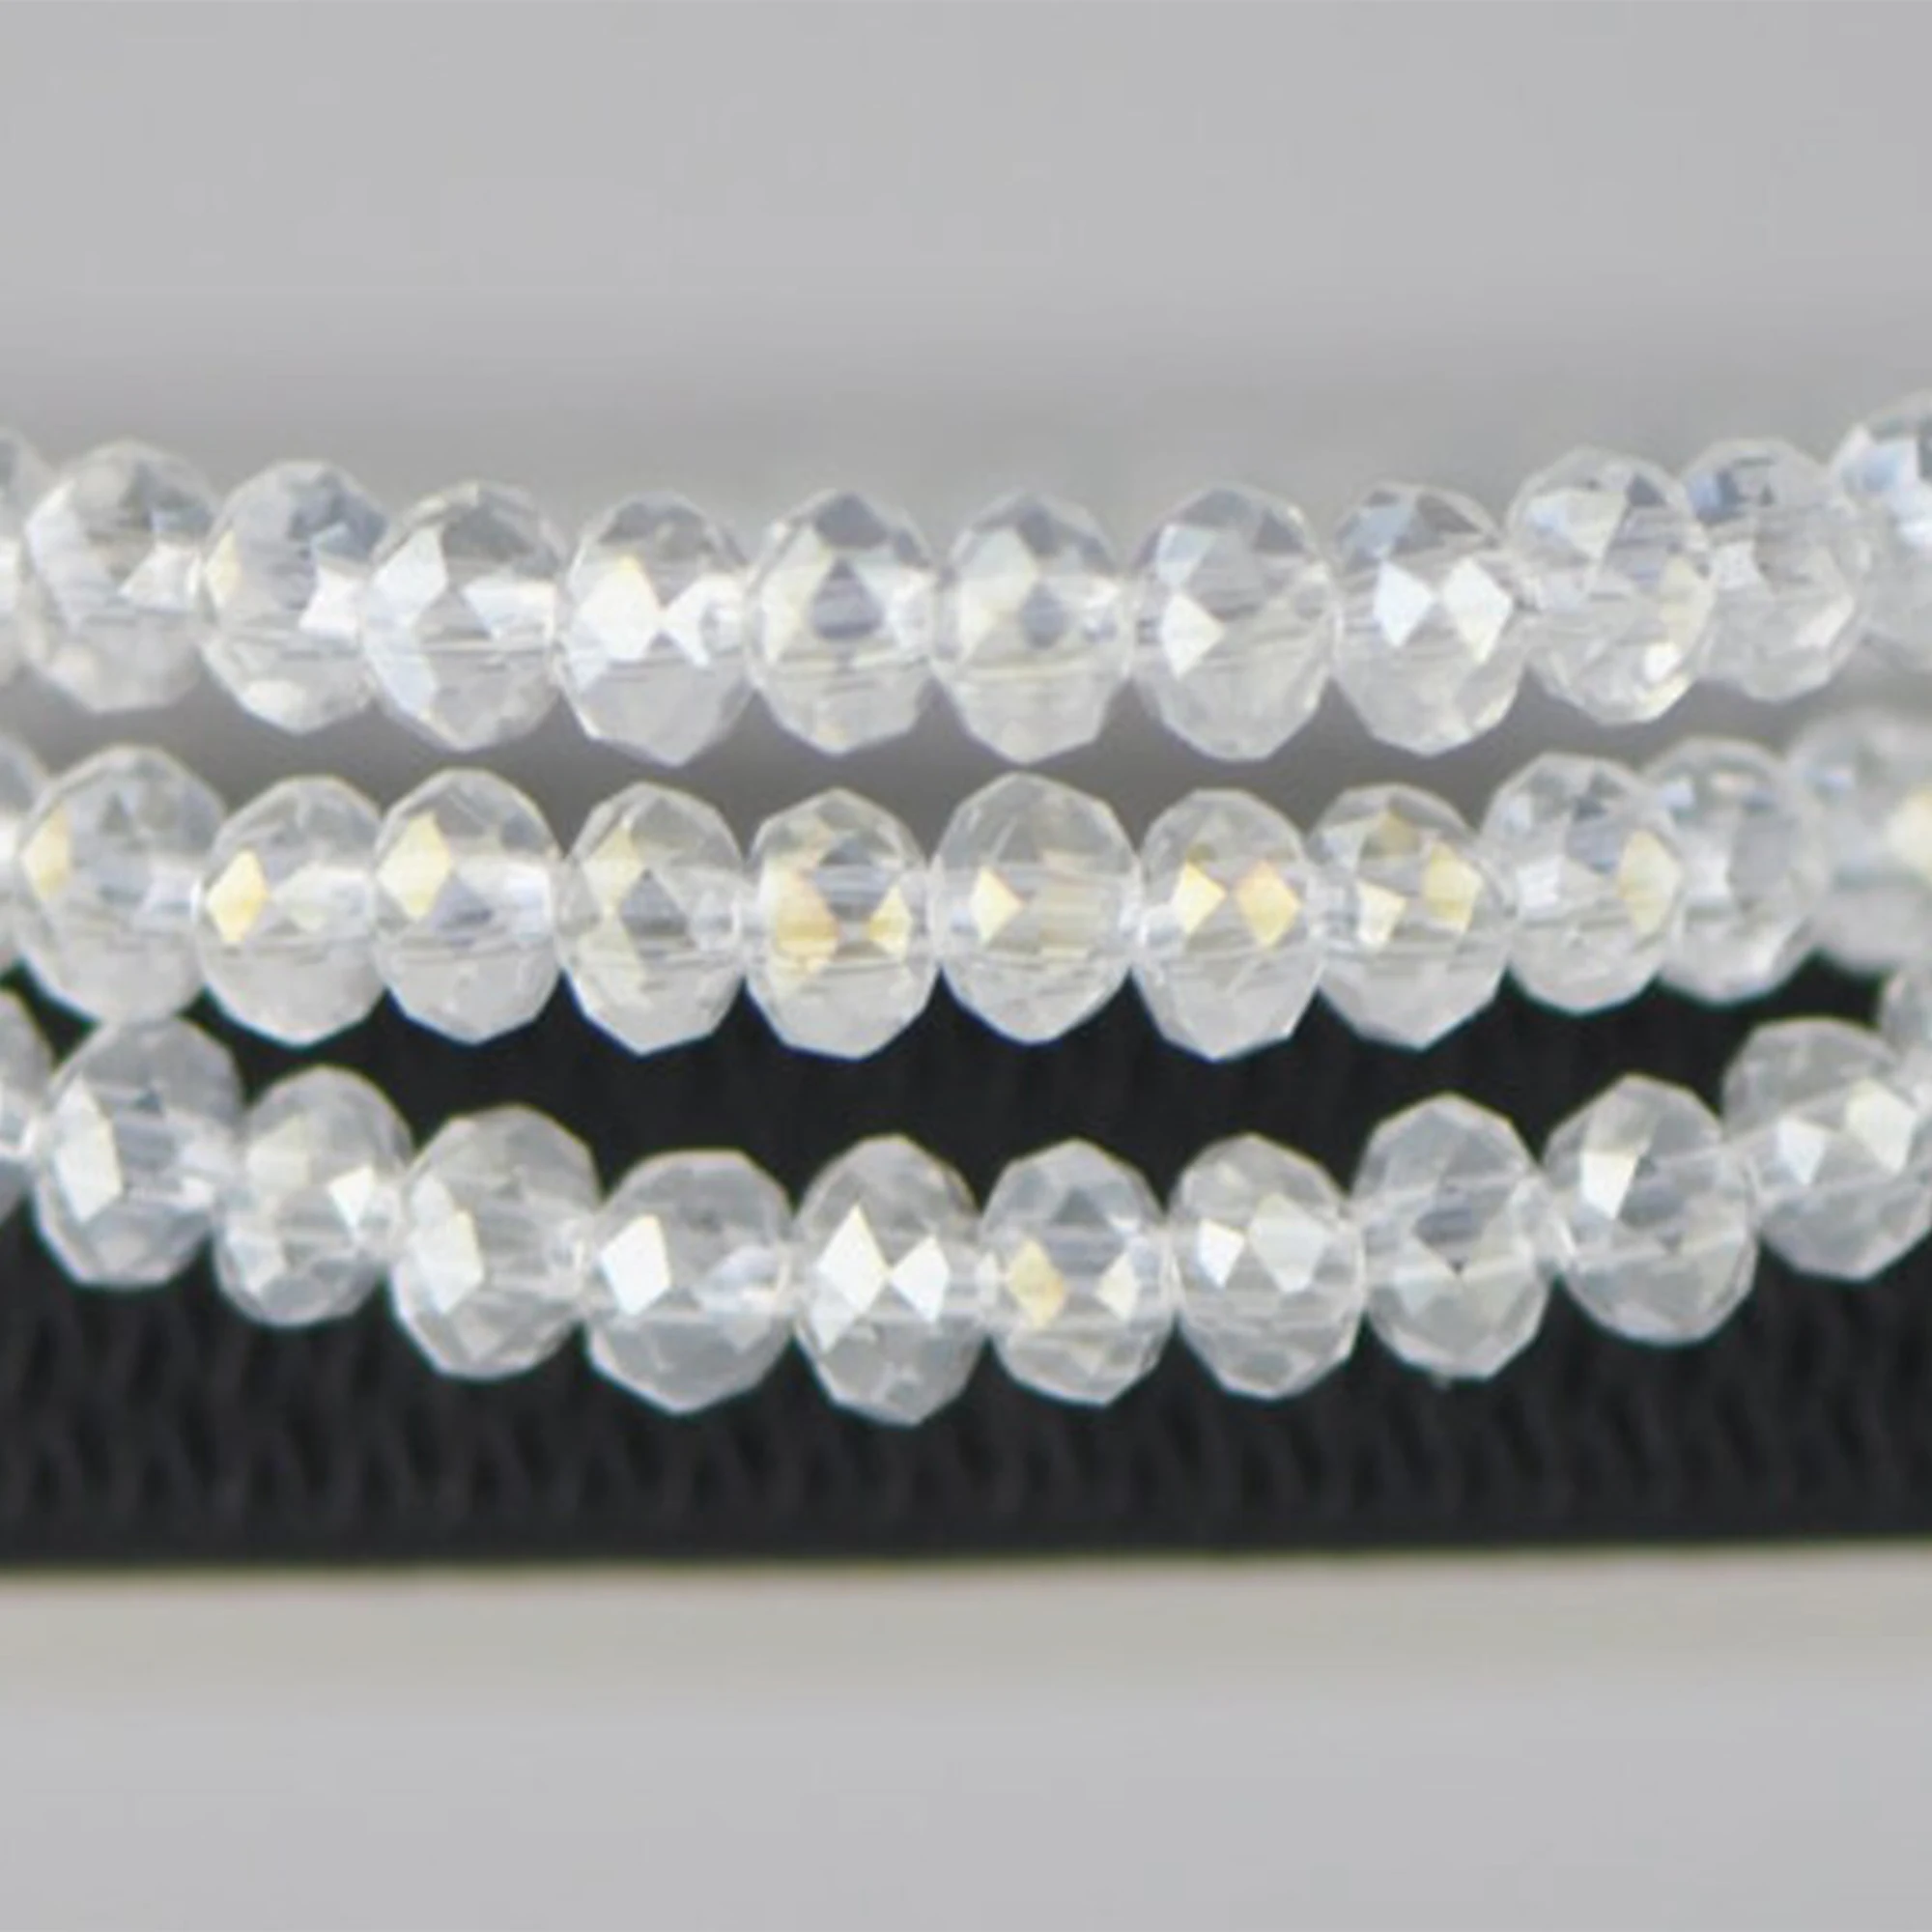 Transparent Clear AB #BZ03-74 145pcs Frosted Crystal Glass Faceted Rondelle Tiny beads 2x3mm